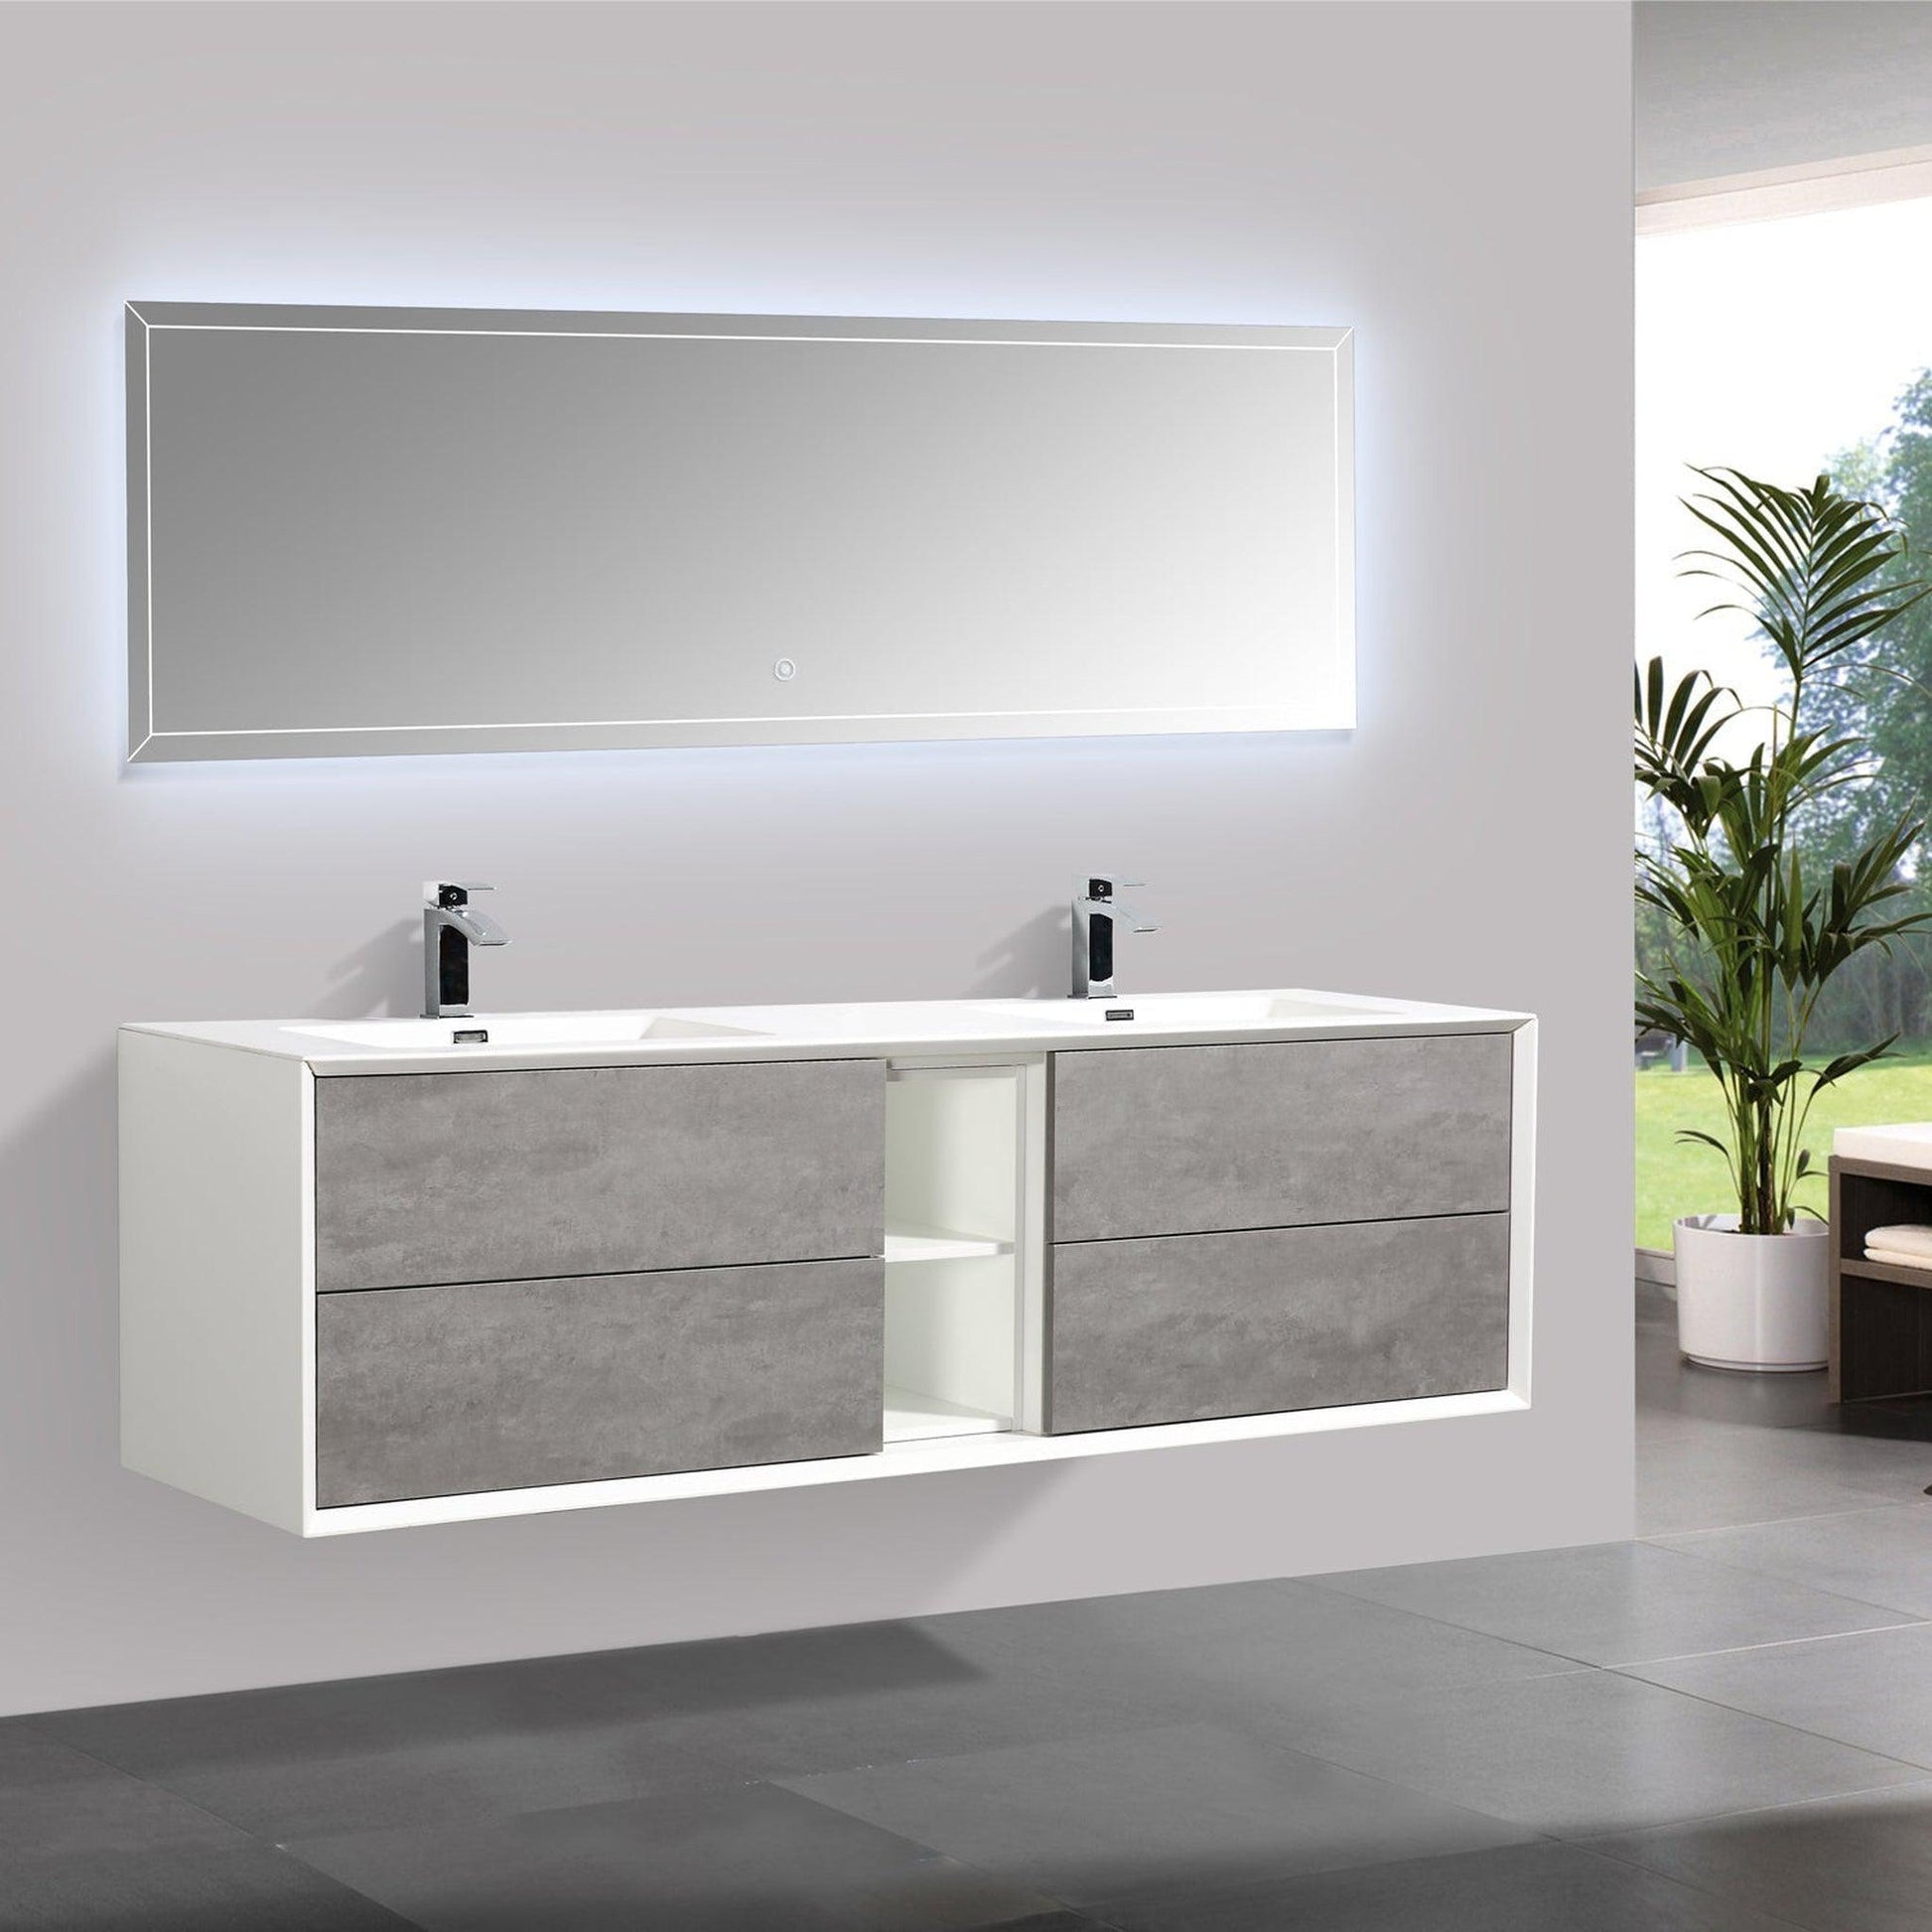 Eviva Vienna 75" x 22" Cement Gray Wall-Mounted Bathroom Vanity With White Double Integrated Sink